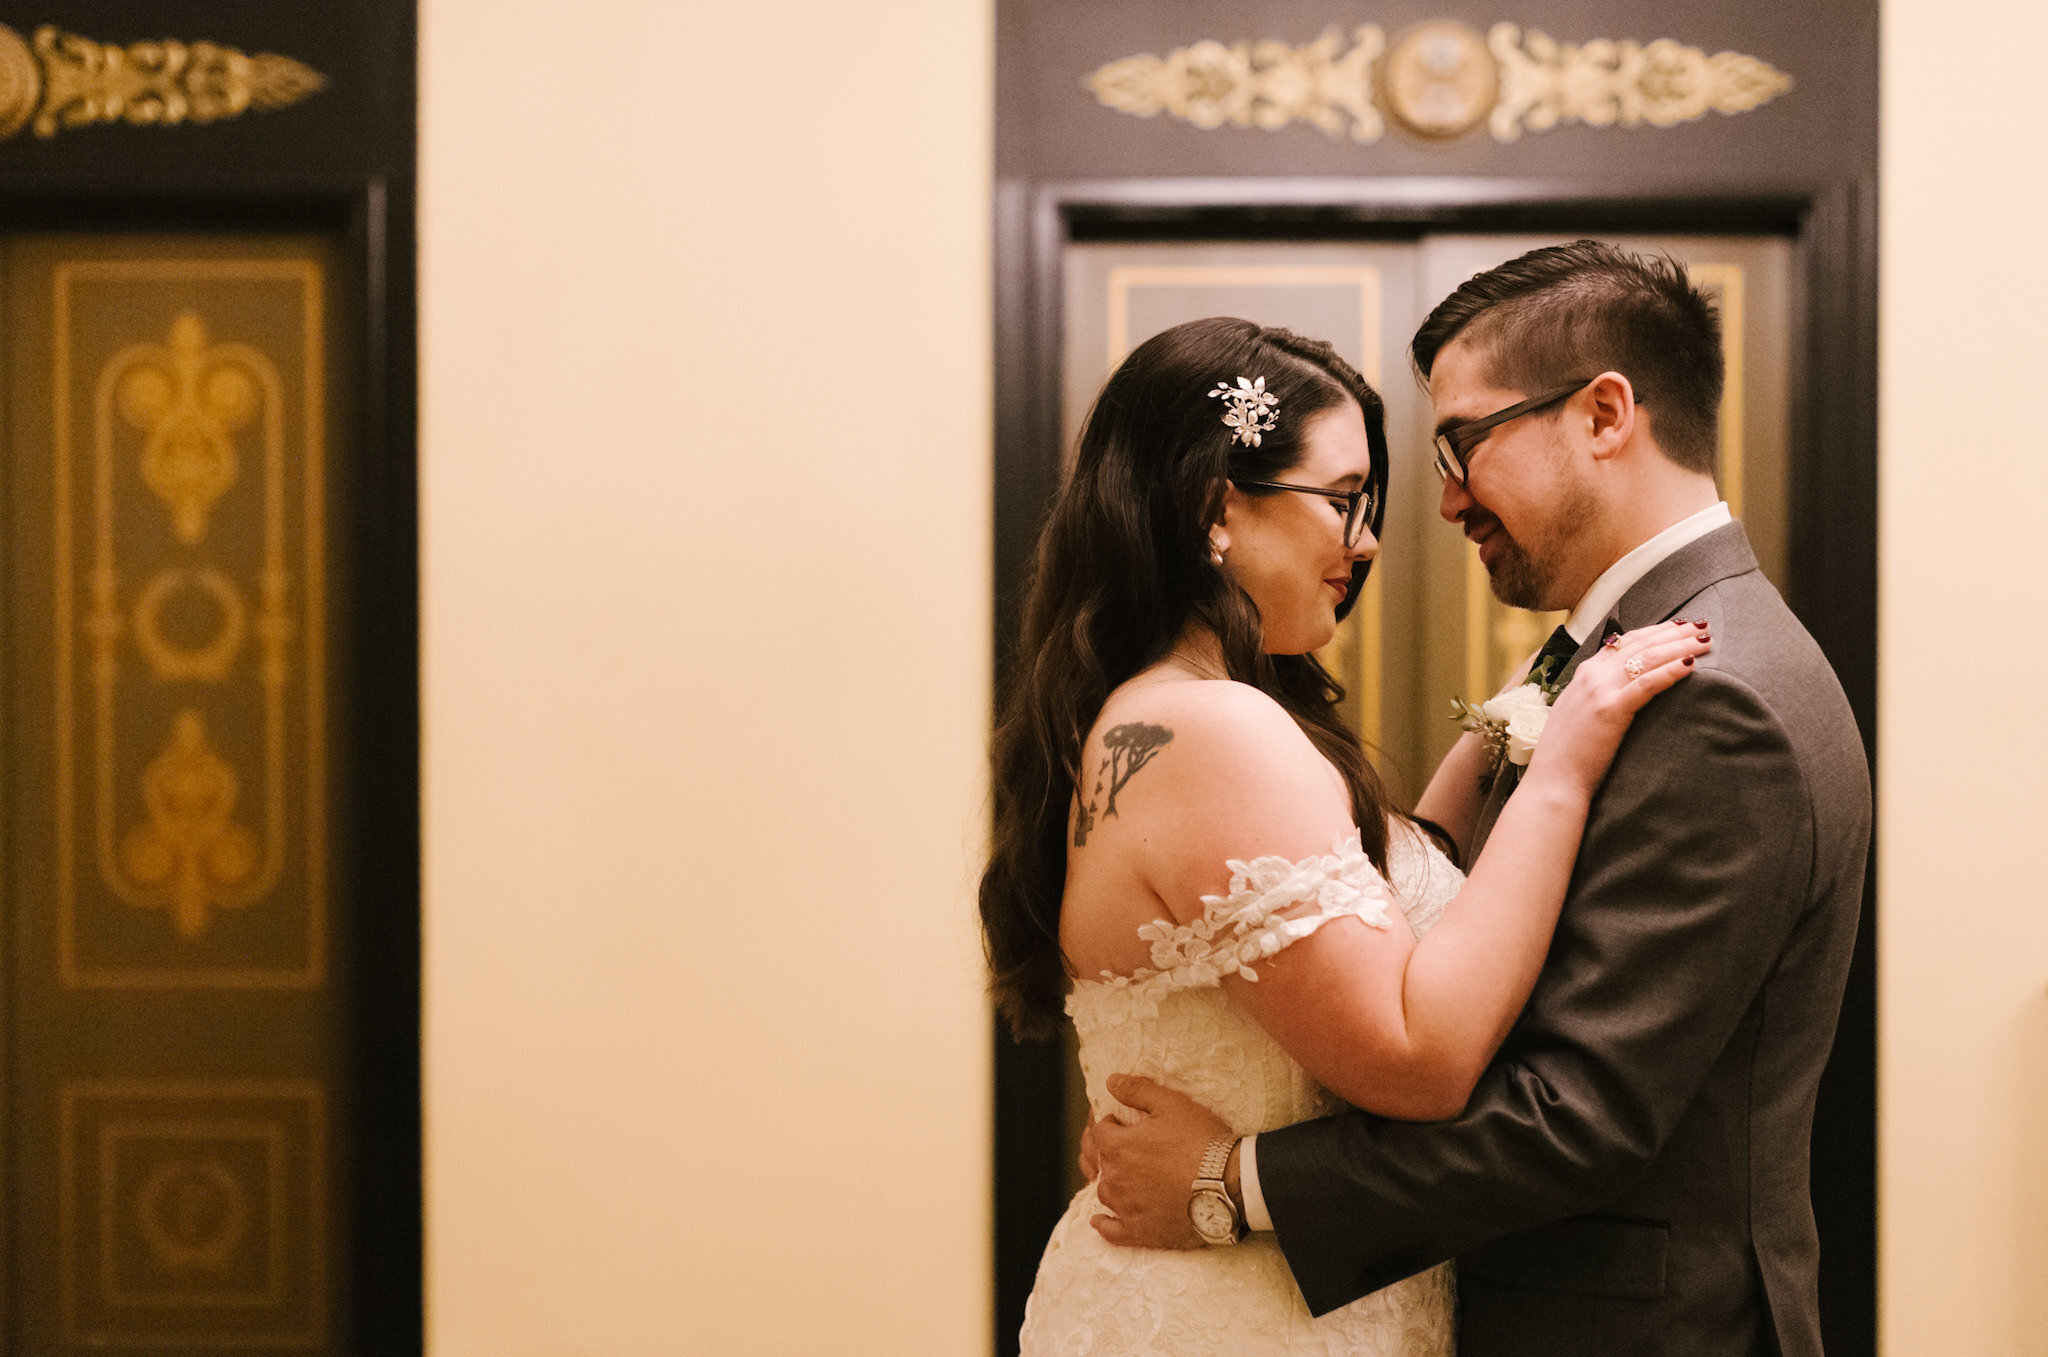 Wedding First Look: Elegant Jewel-Toned Wedding captured by Dorey Kronick featured on CHI thee WED